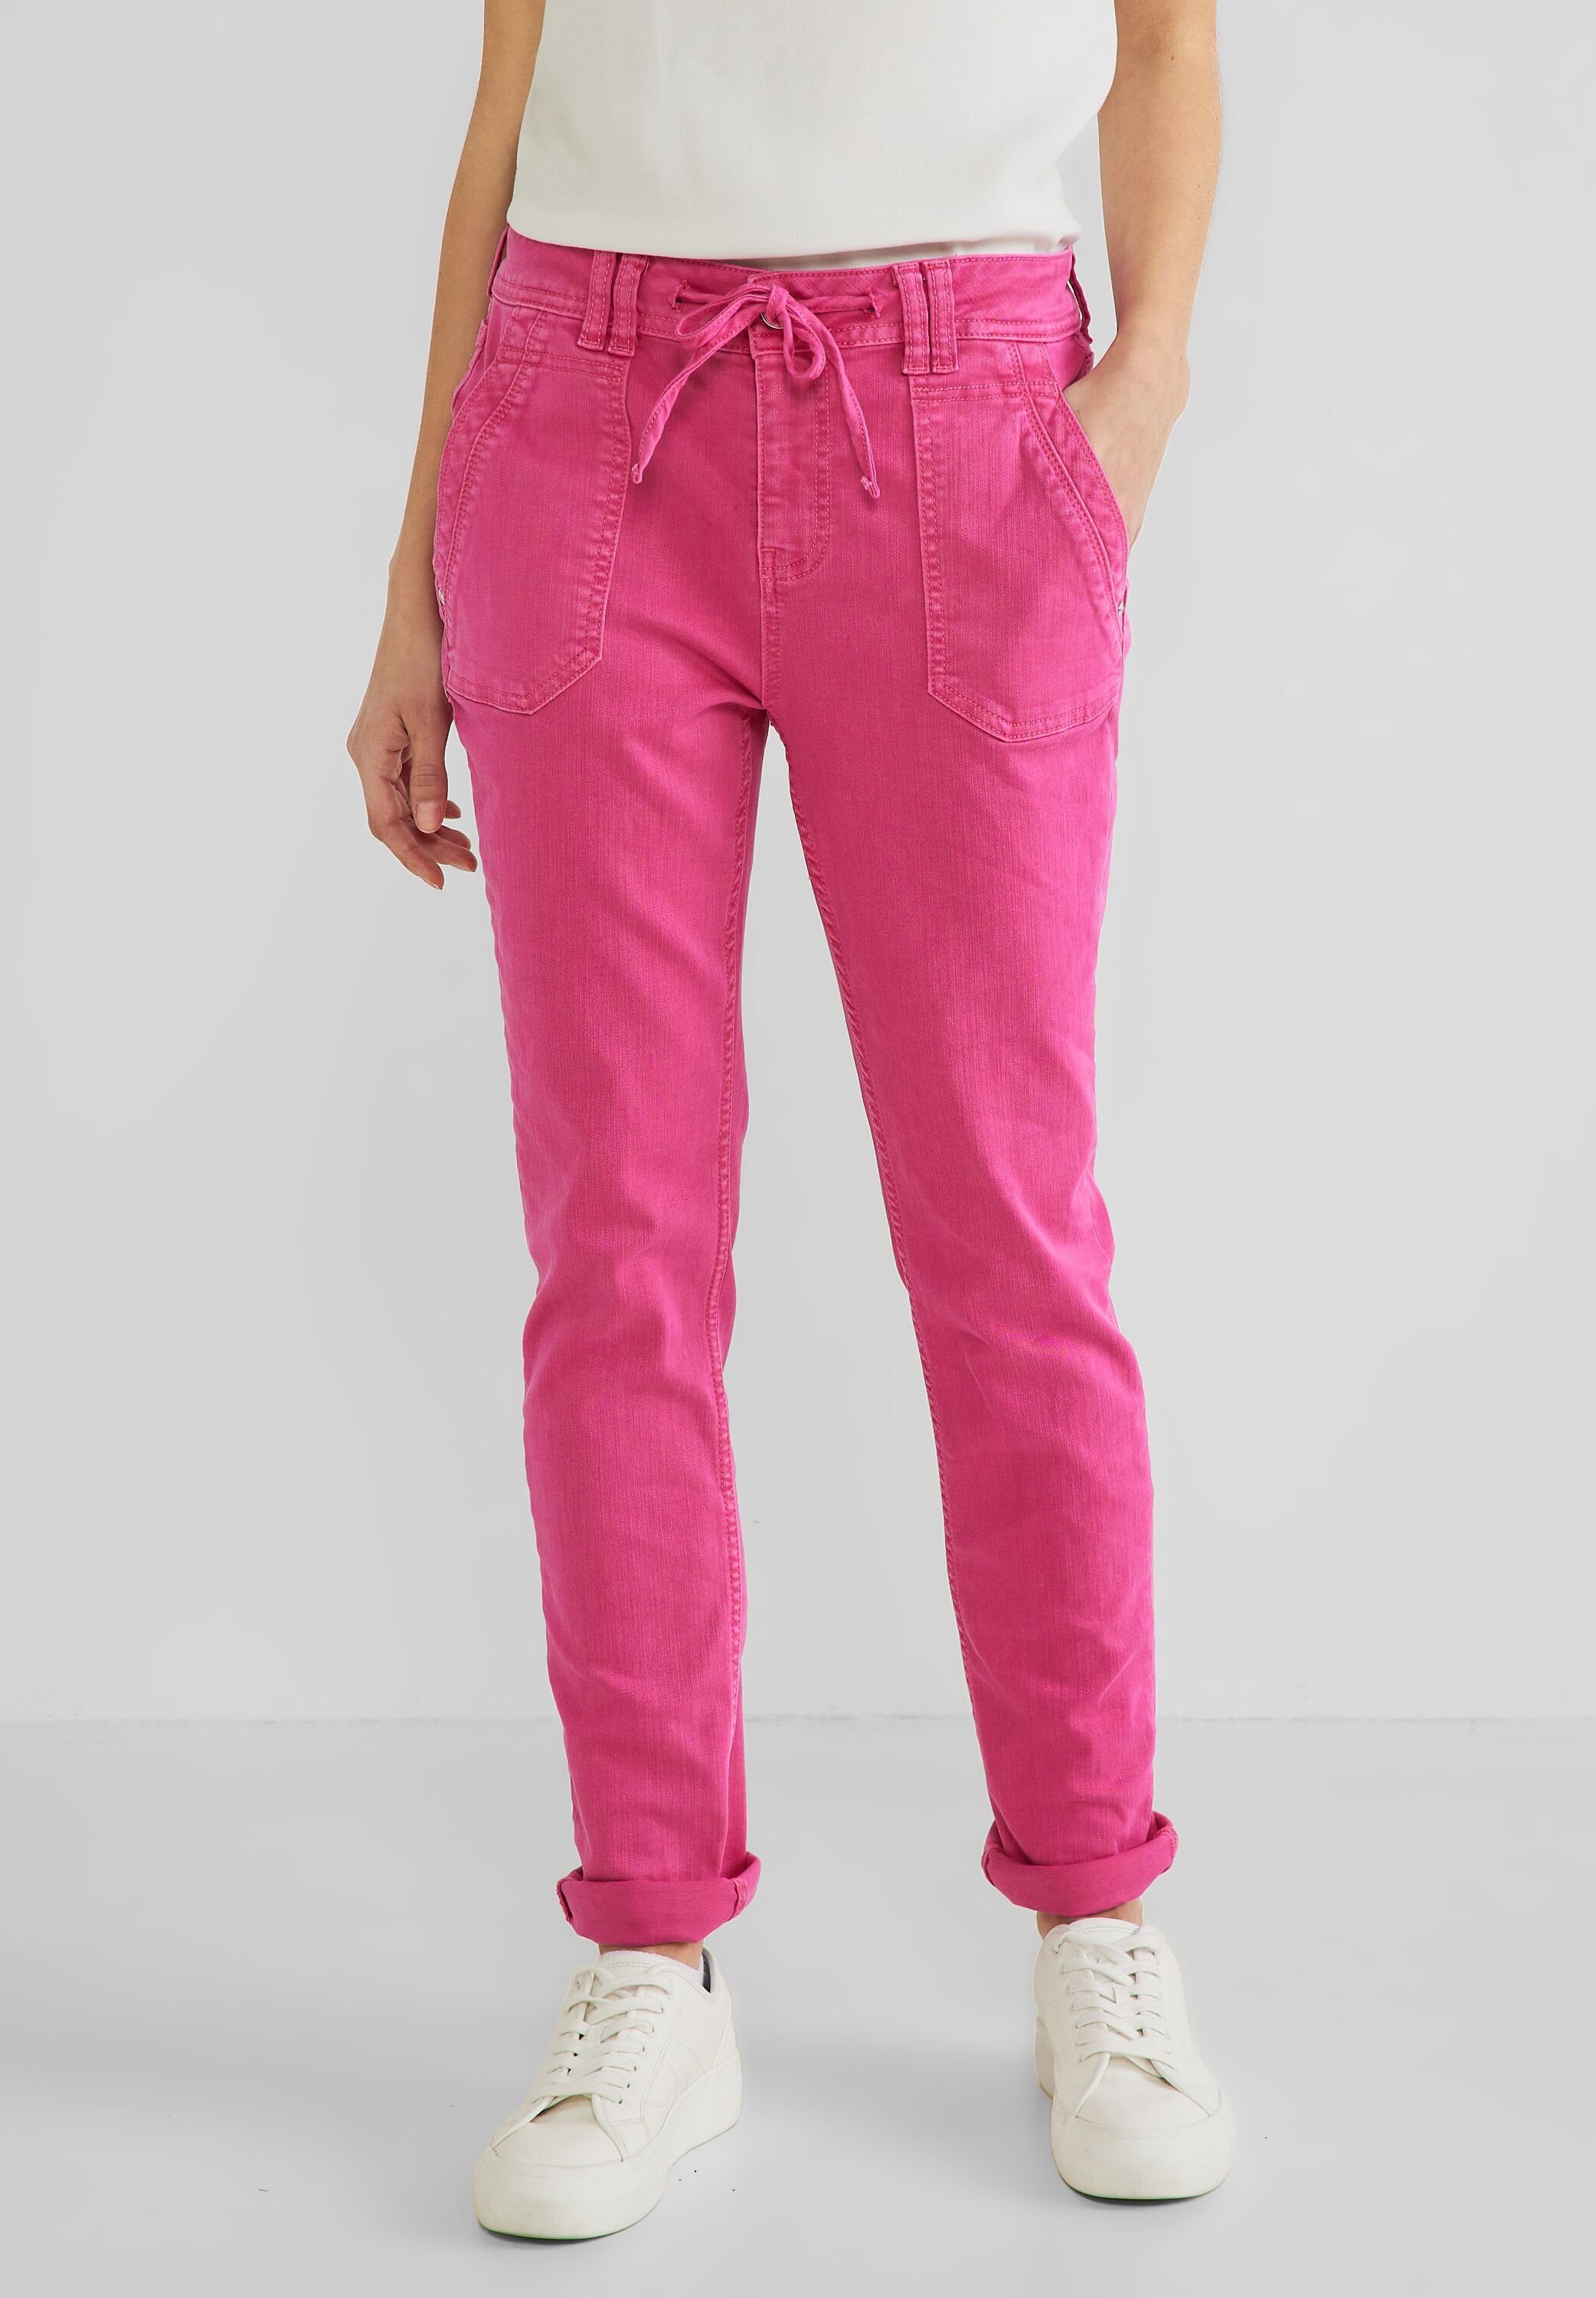 STREET ONE Bequeme Jeans Street One Loose Fit Jeans in Tamed Rose Washed (1-tlg)  Tunnelzugbändchen